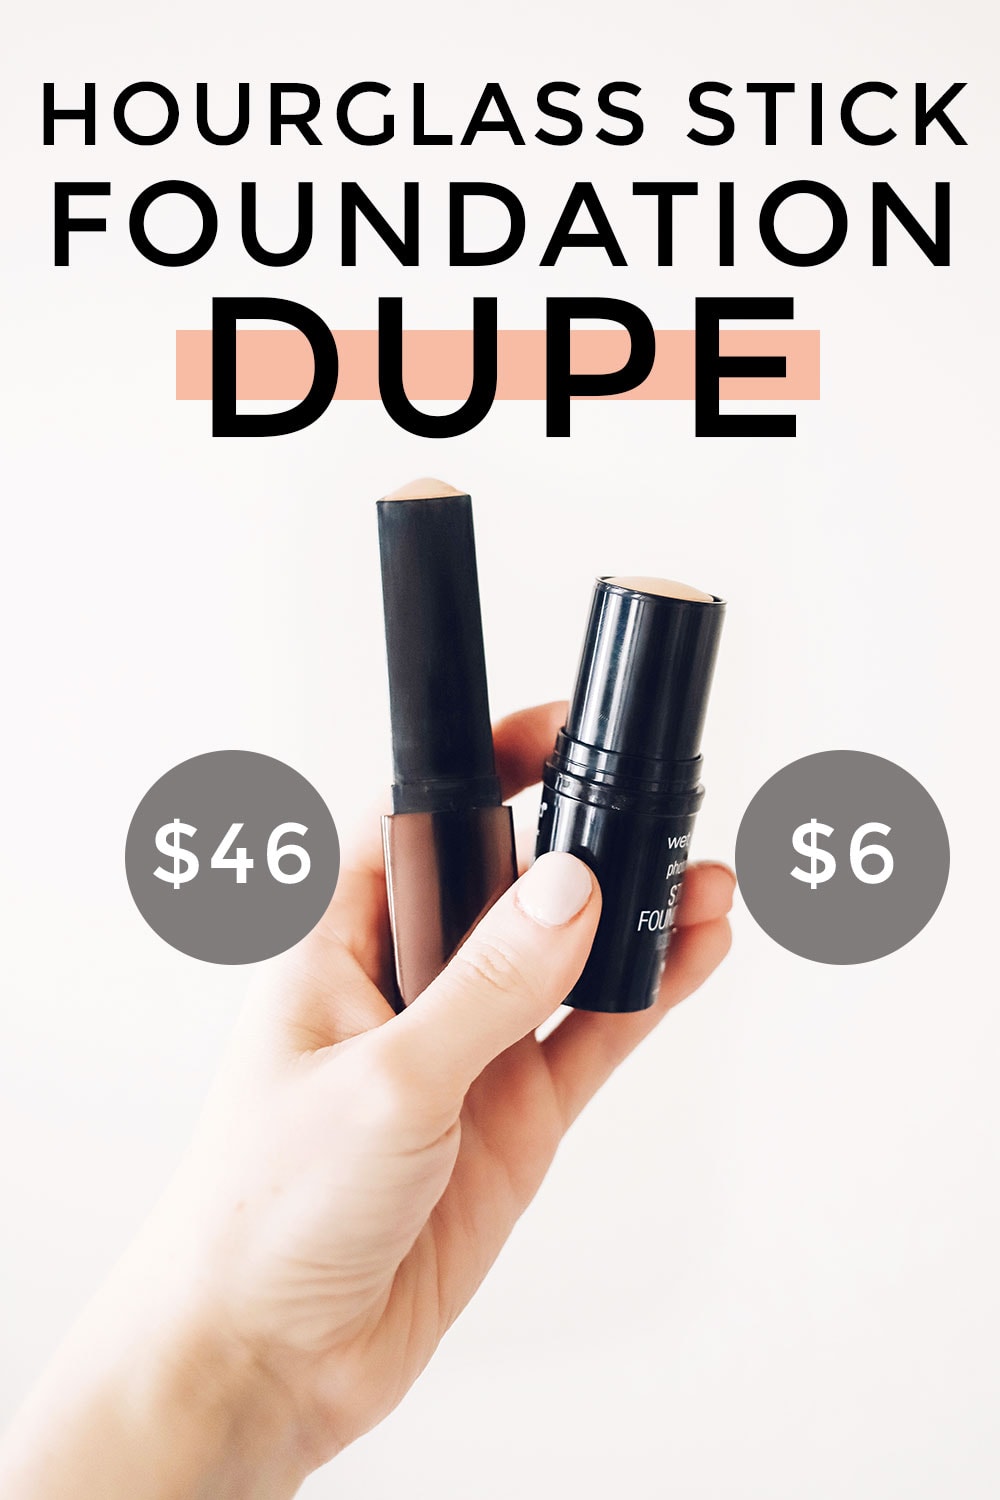 Houston beauty blogger Meg O. on the Go shares an Hourglass Vanish Stick Foundation dupe! Only . $6!